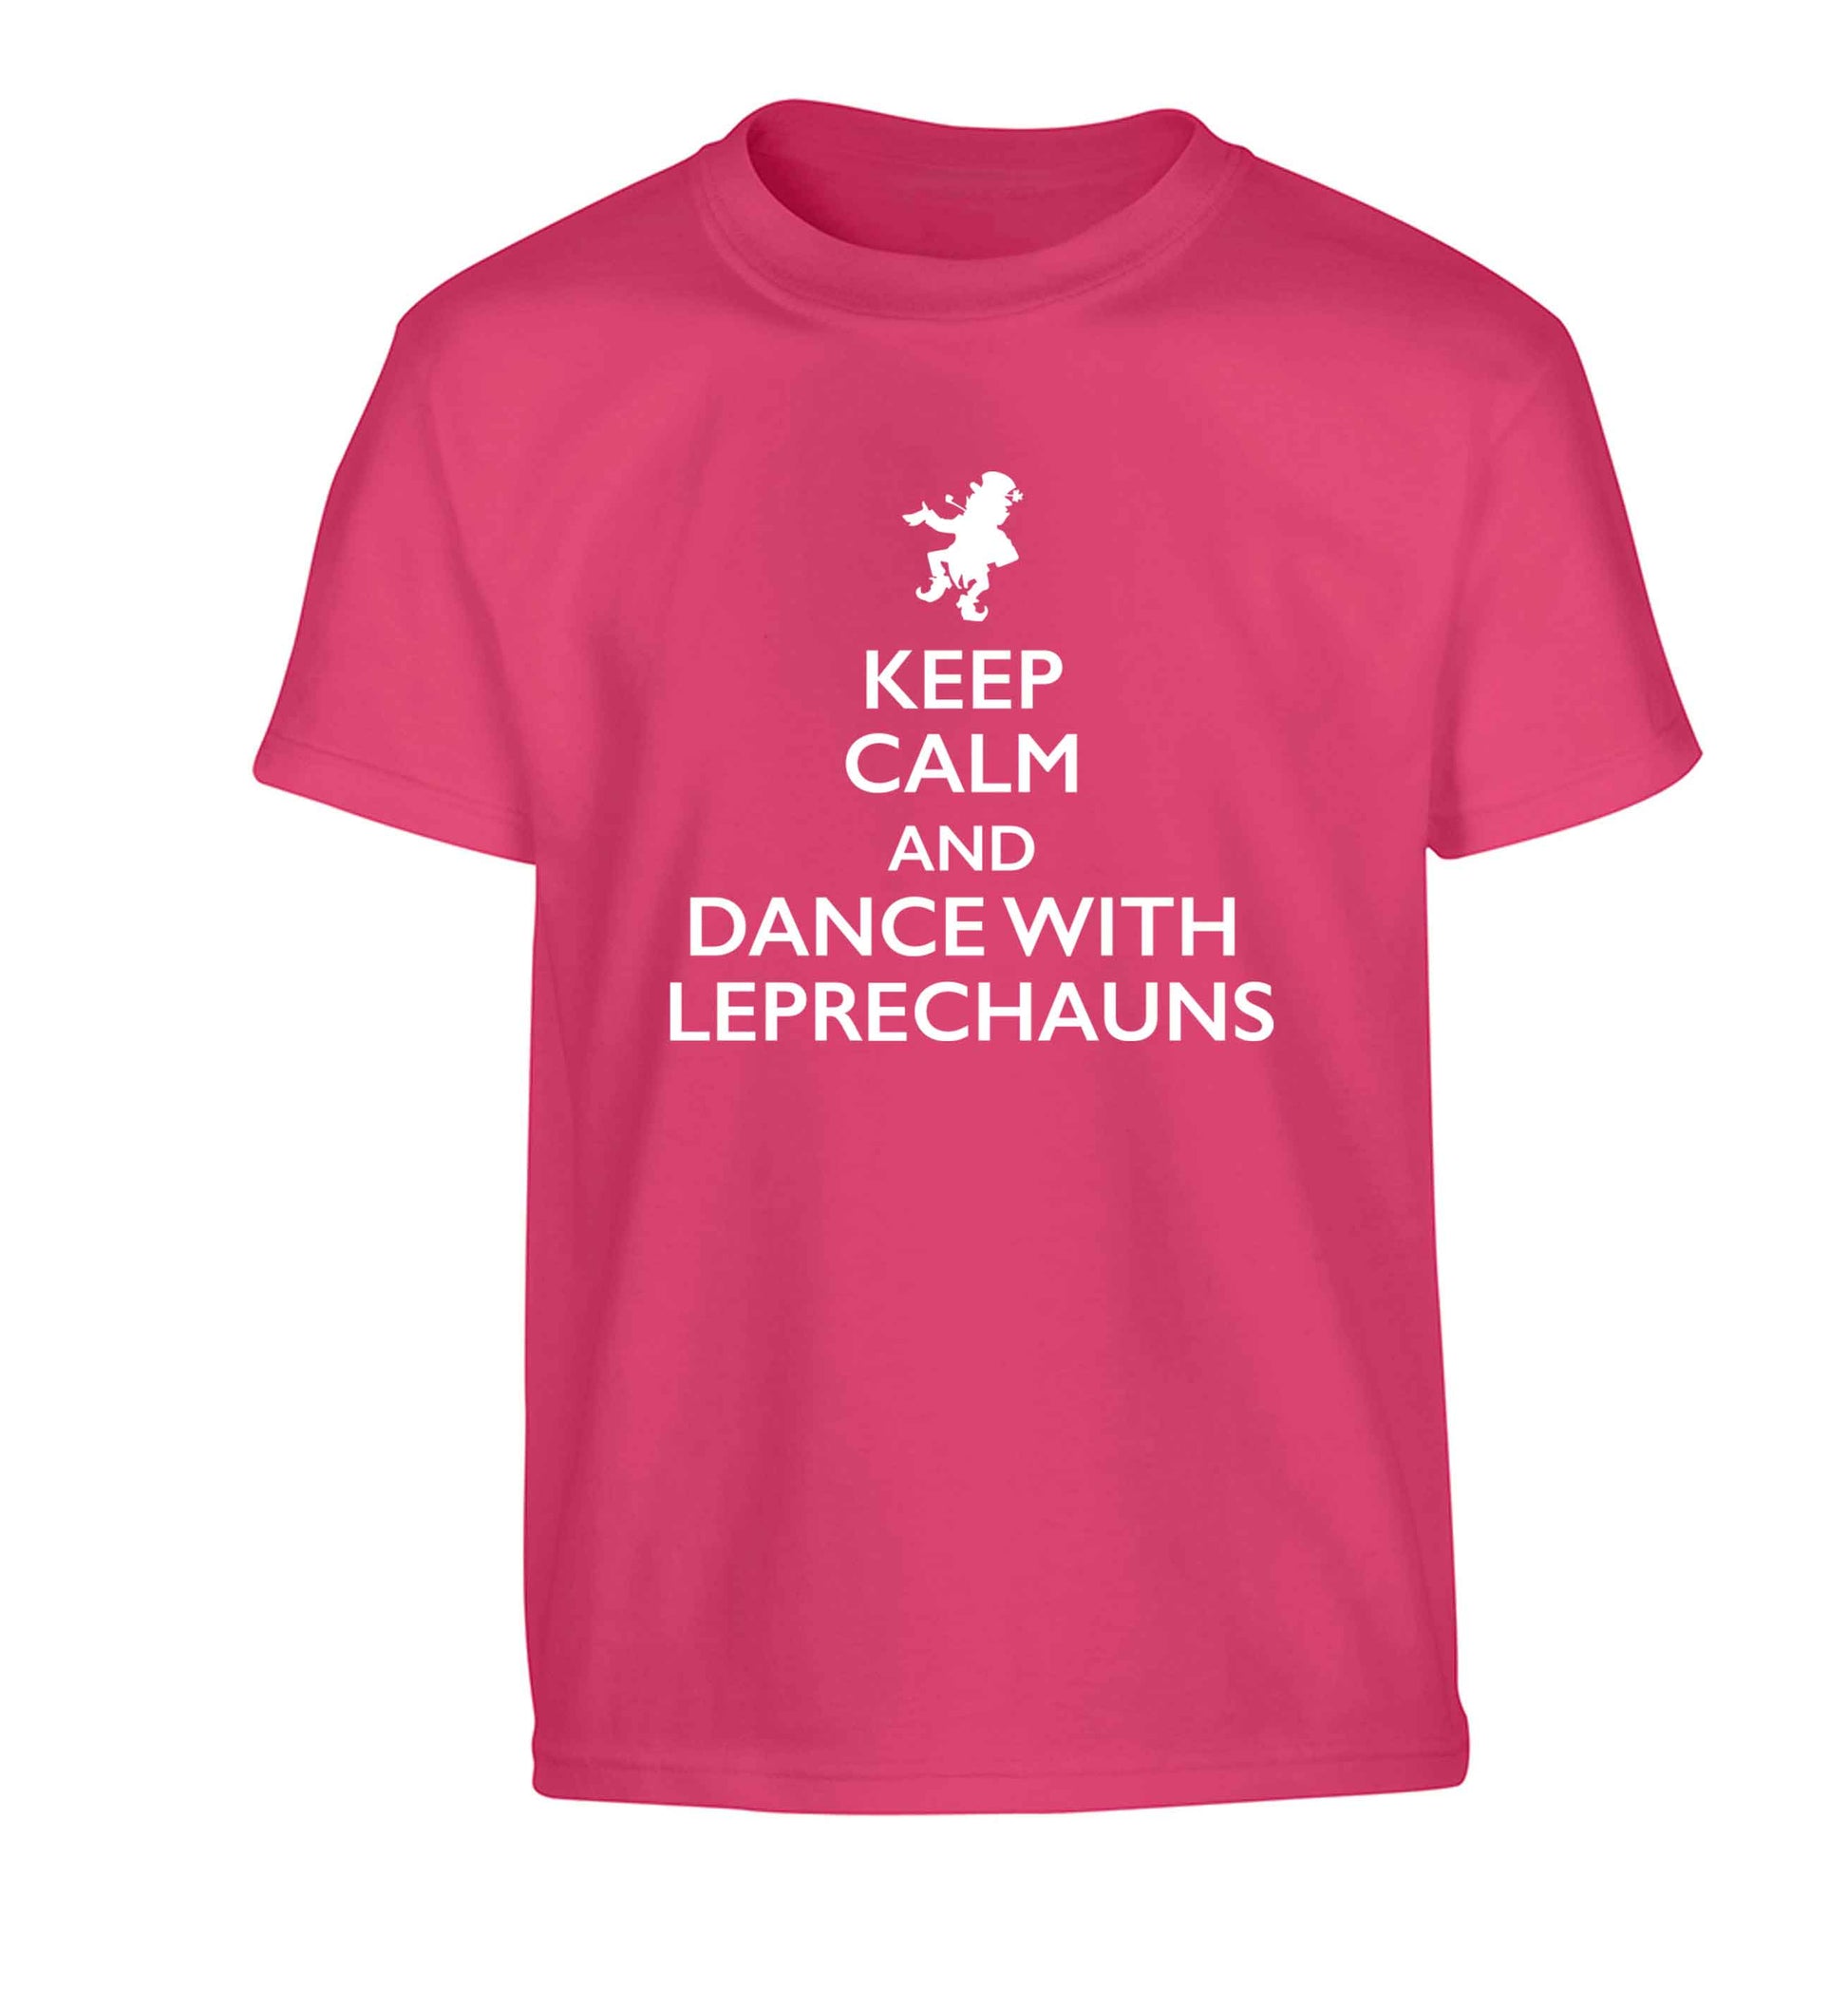 Keep calm and dance with leprechauns Children's pink Tshirt 12-13 Years